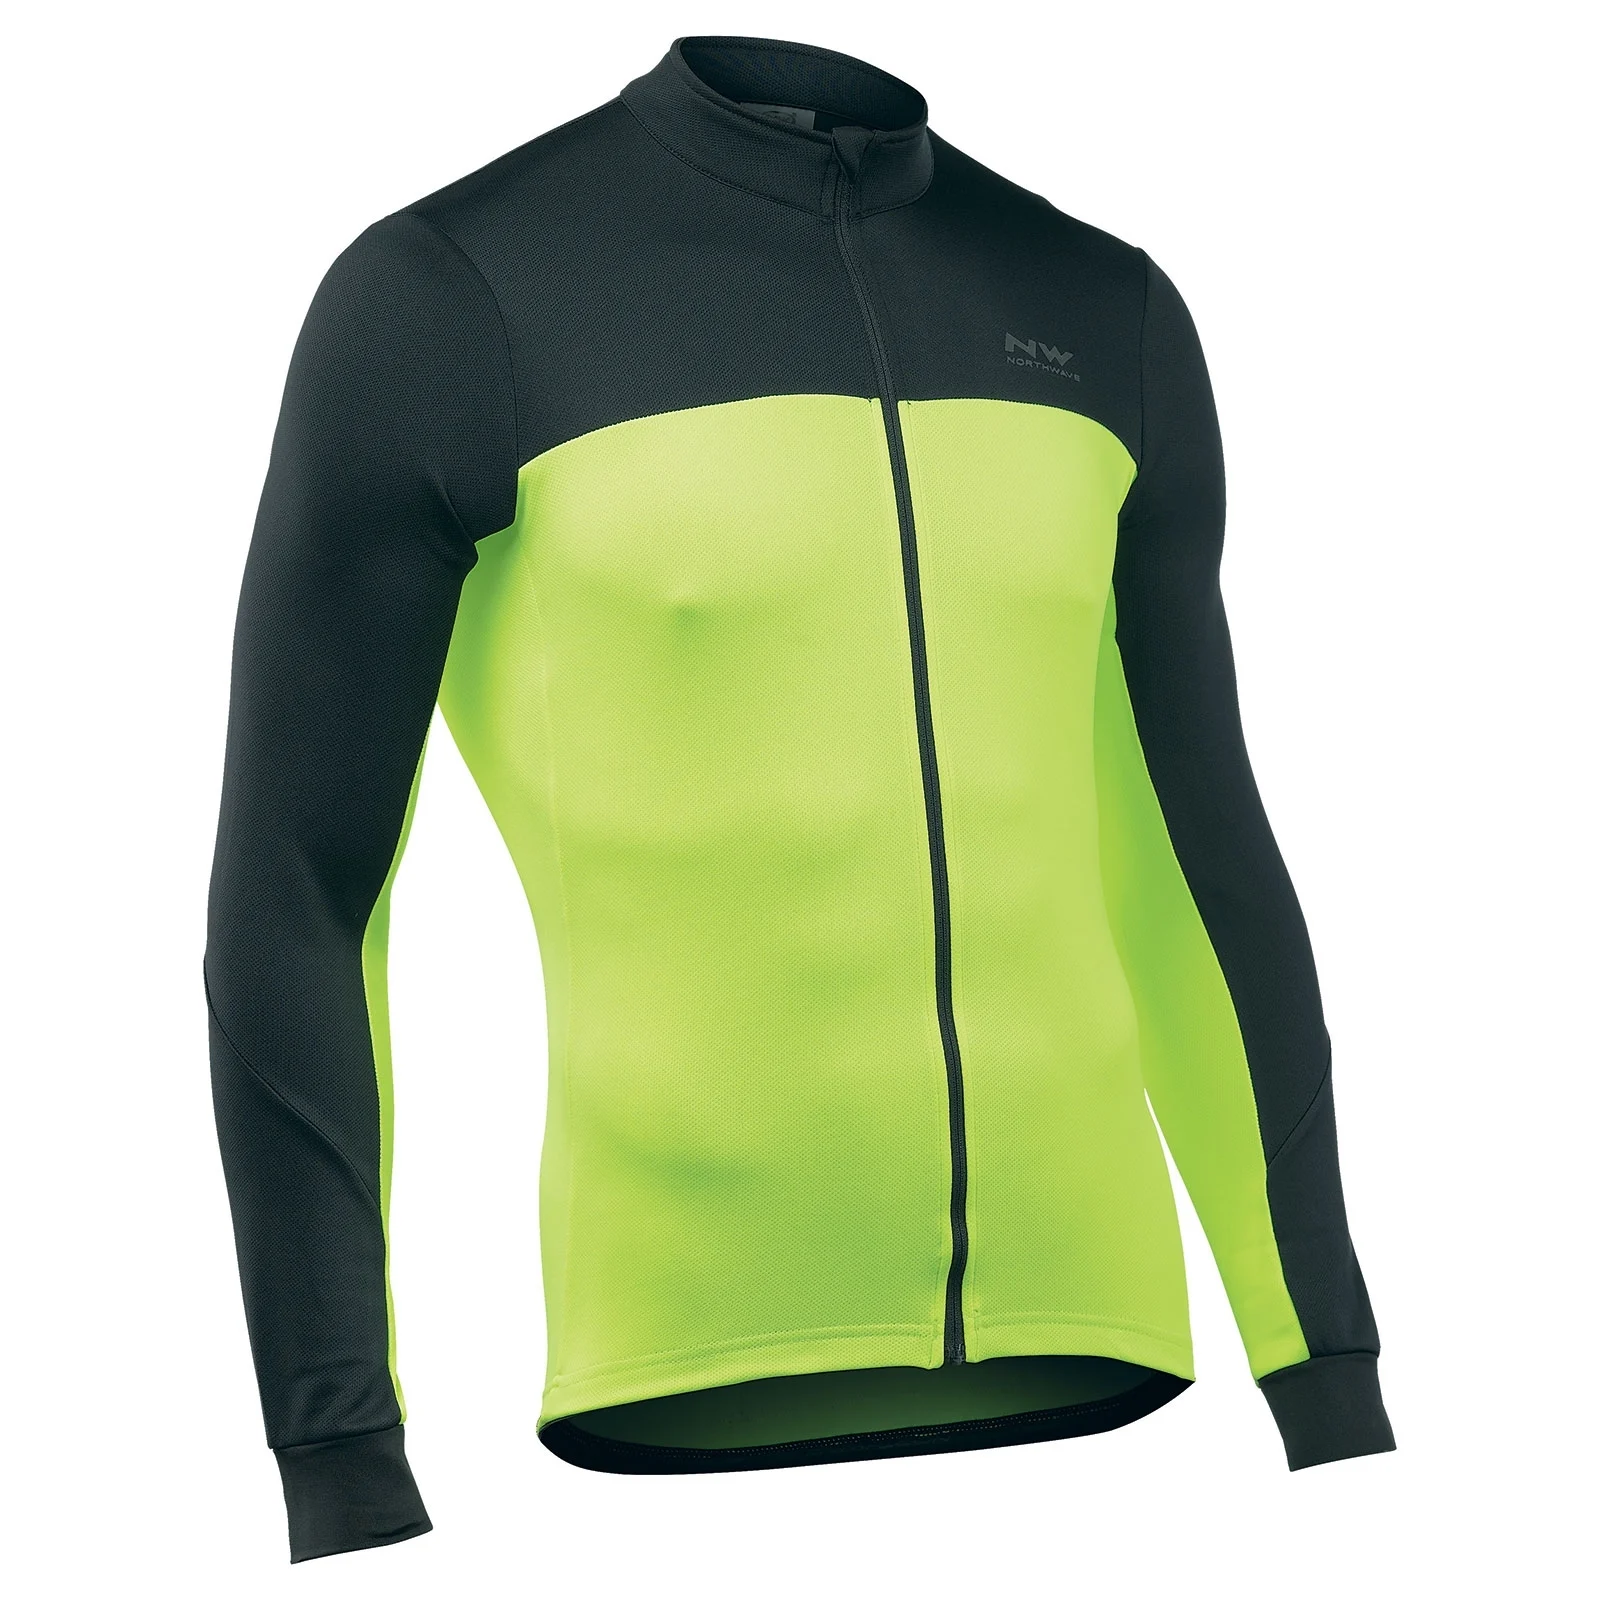 Northwave  FORCE 2 JERSEY BLACK/YELLOW FLUO